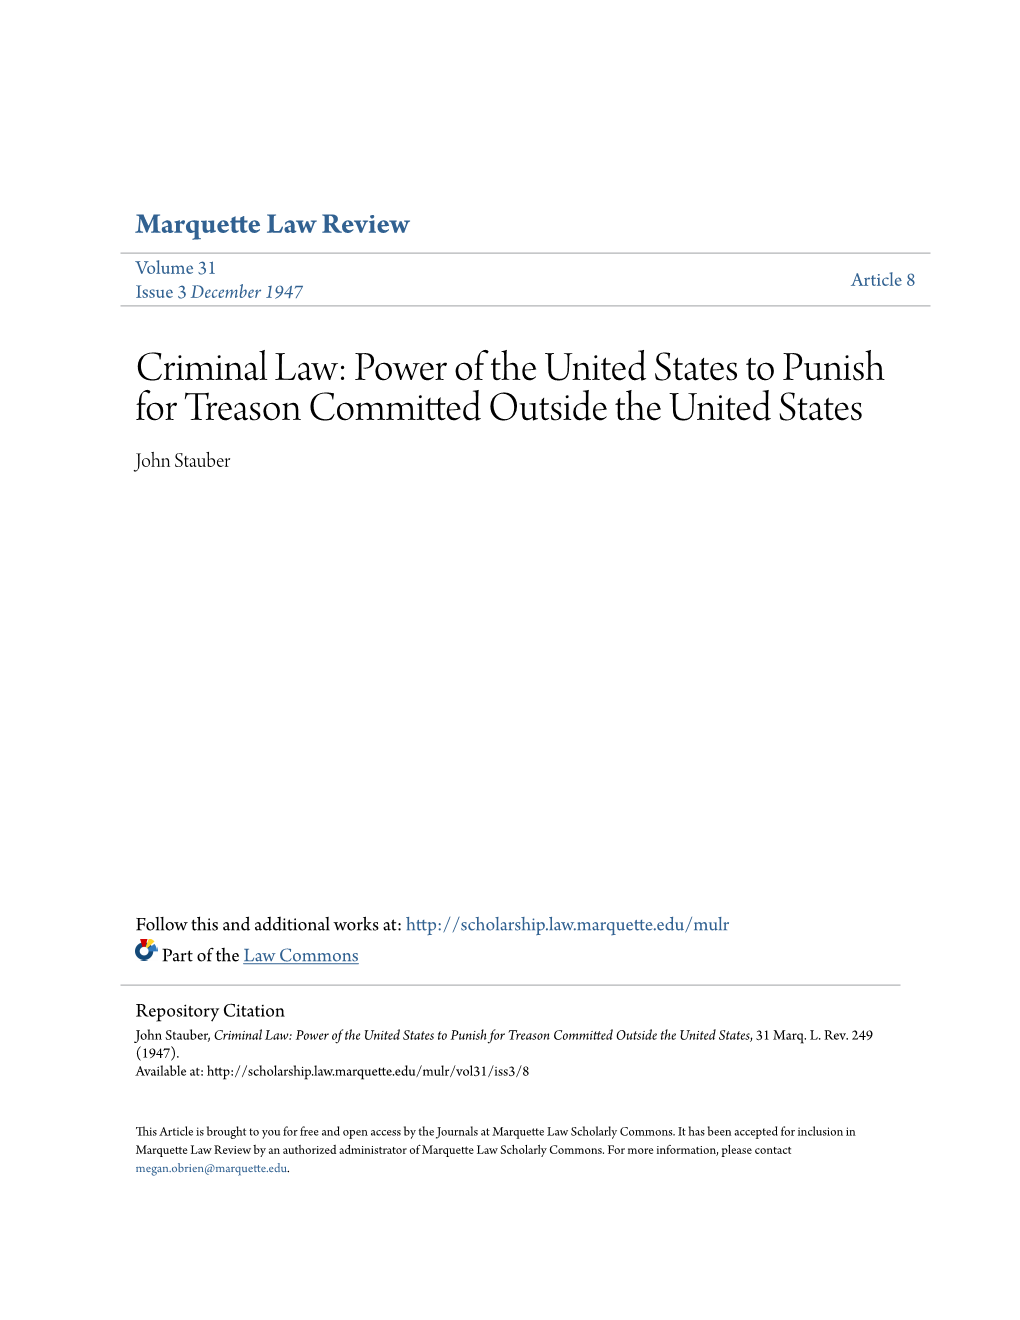 Criminal Law: Power of the United States to Punish for Treason Committed Outside the United States John Stauber